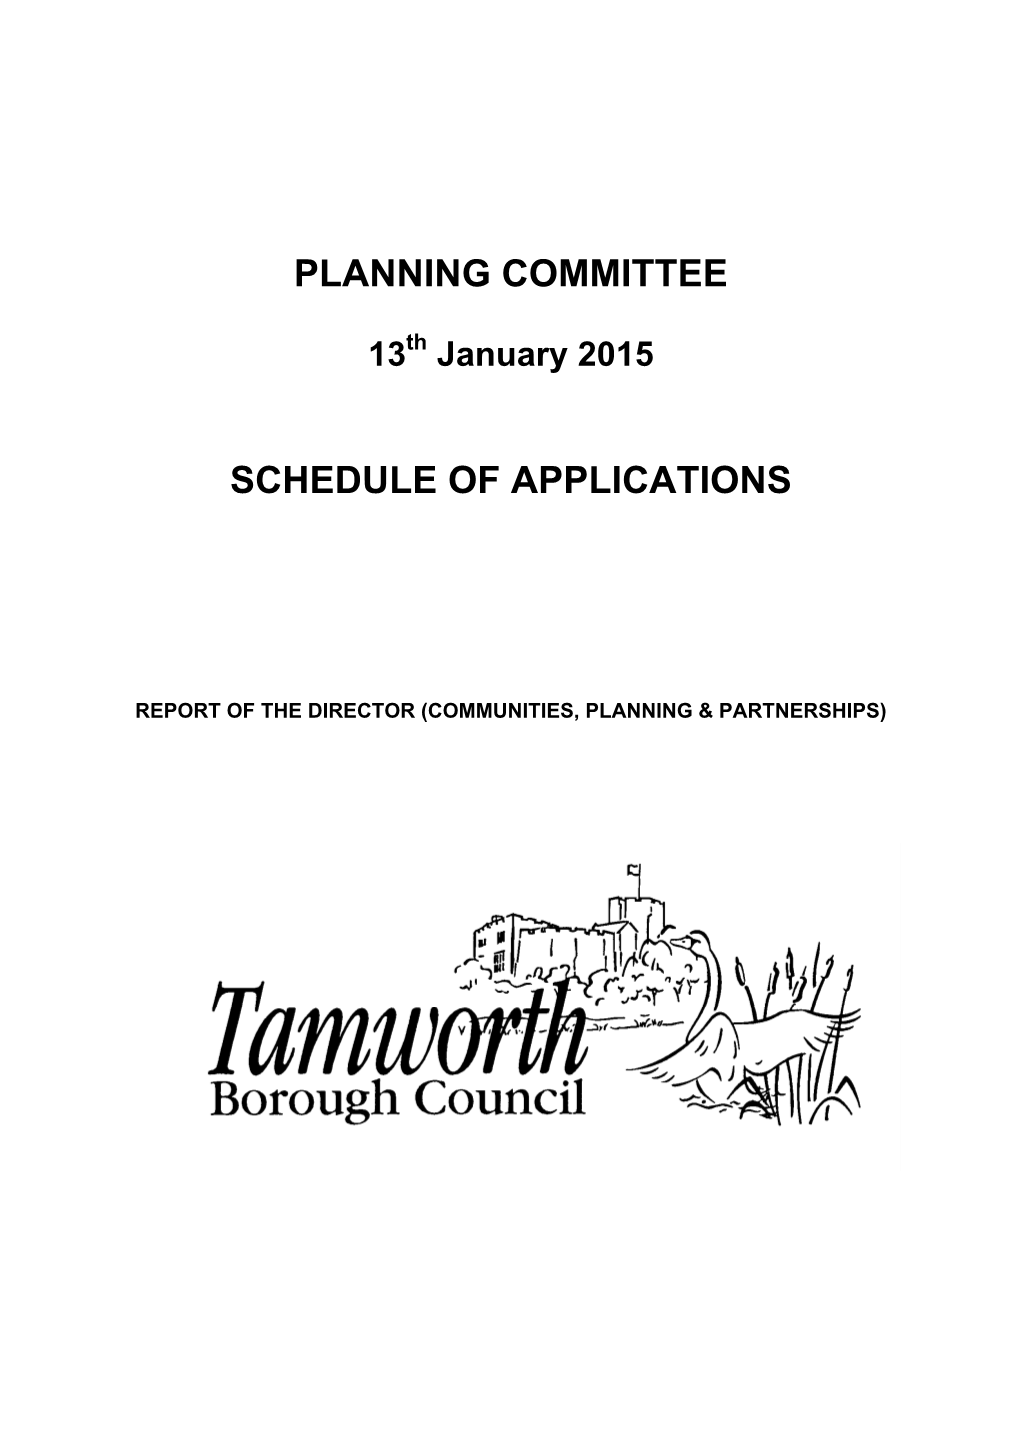 Planning Committee Schedule of Applications